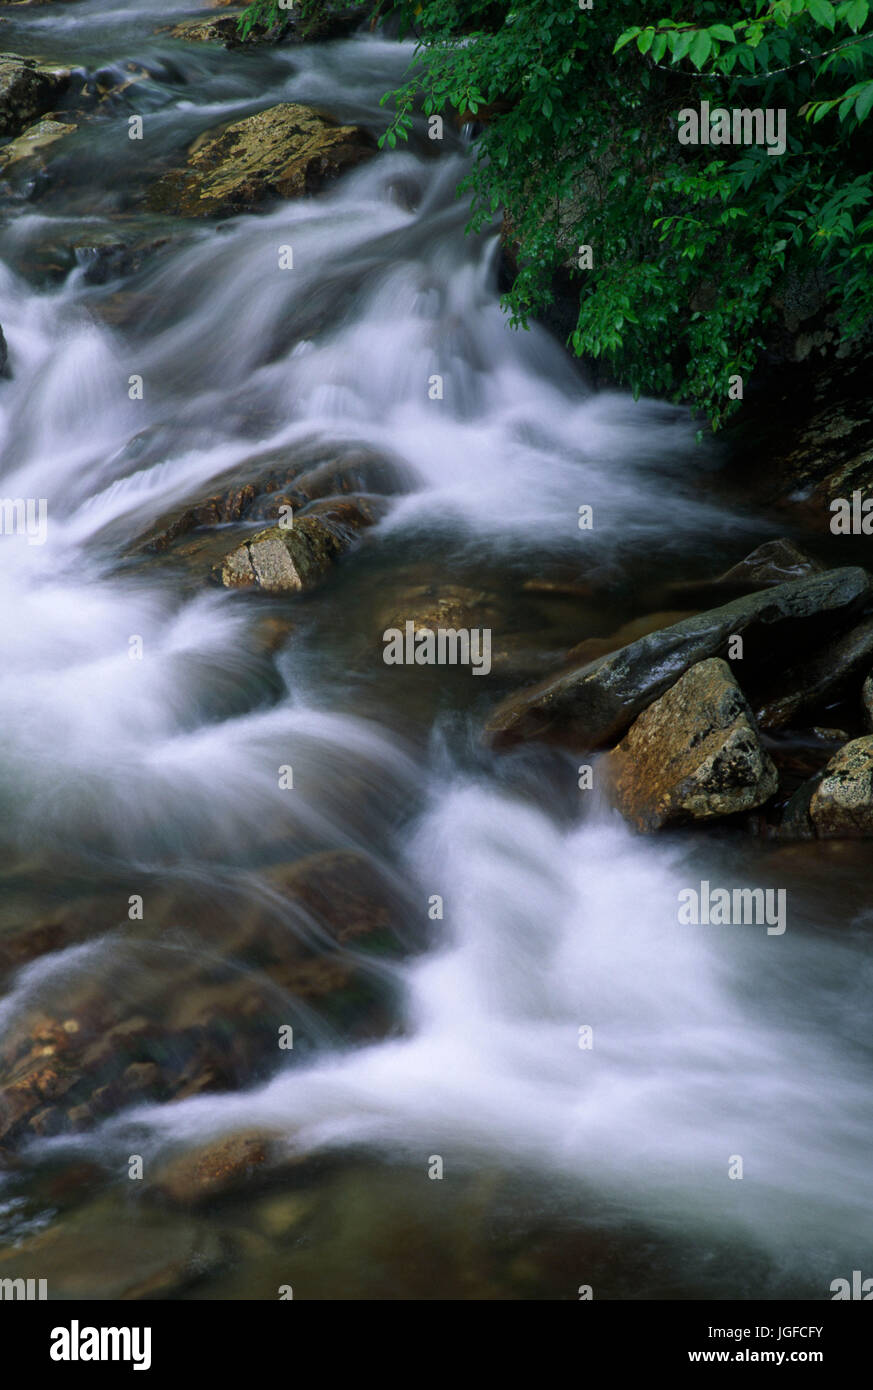 North Prong Little Pigeon River, Great Smoky Mountains National Park, Tennessee Stock Photo